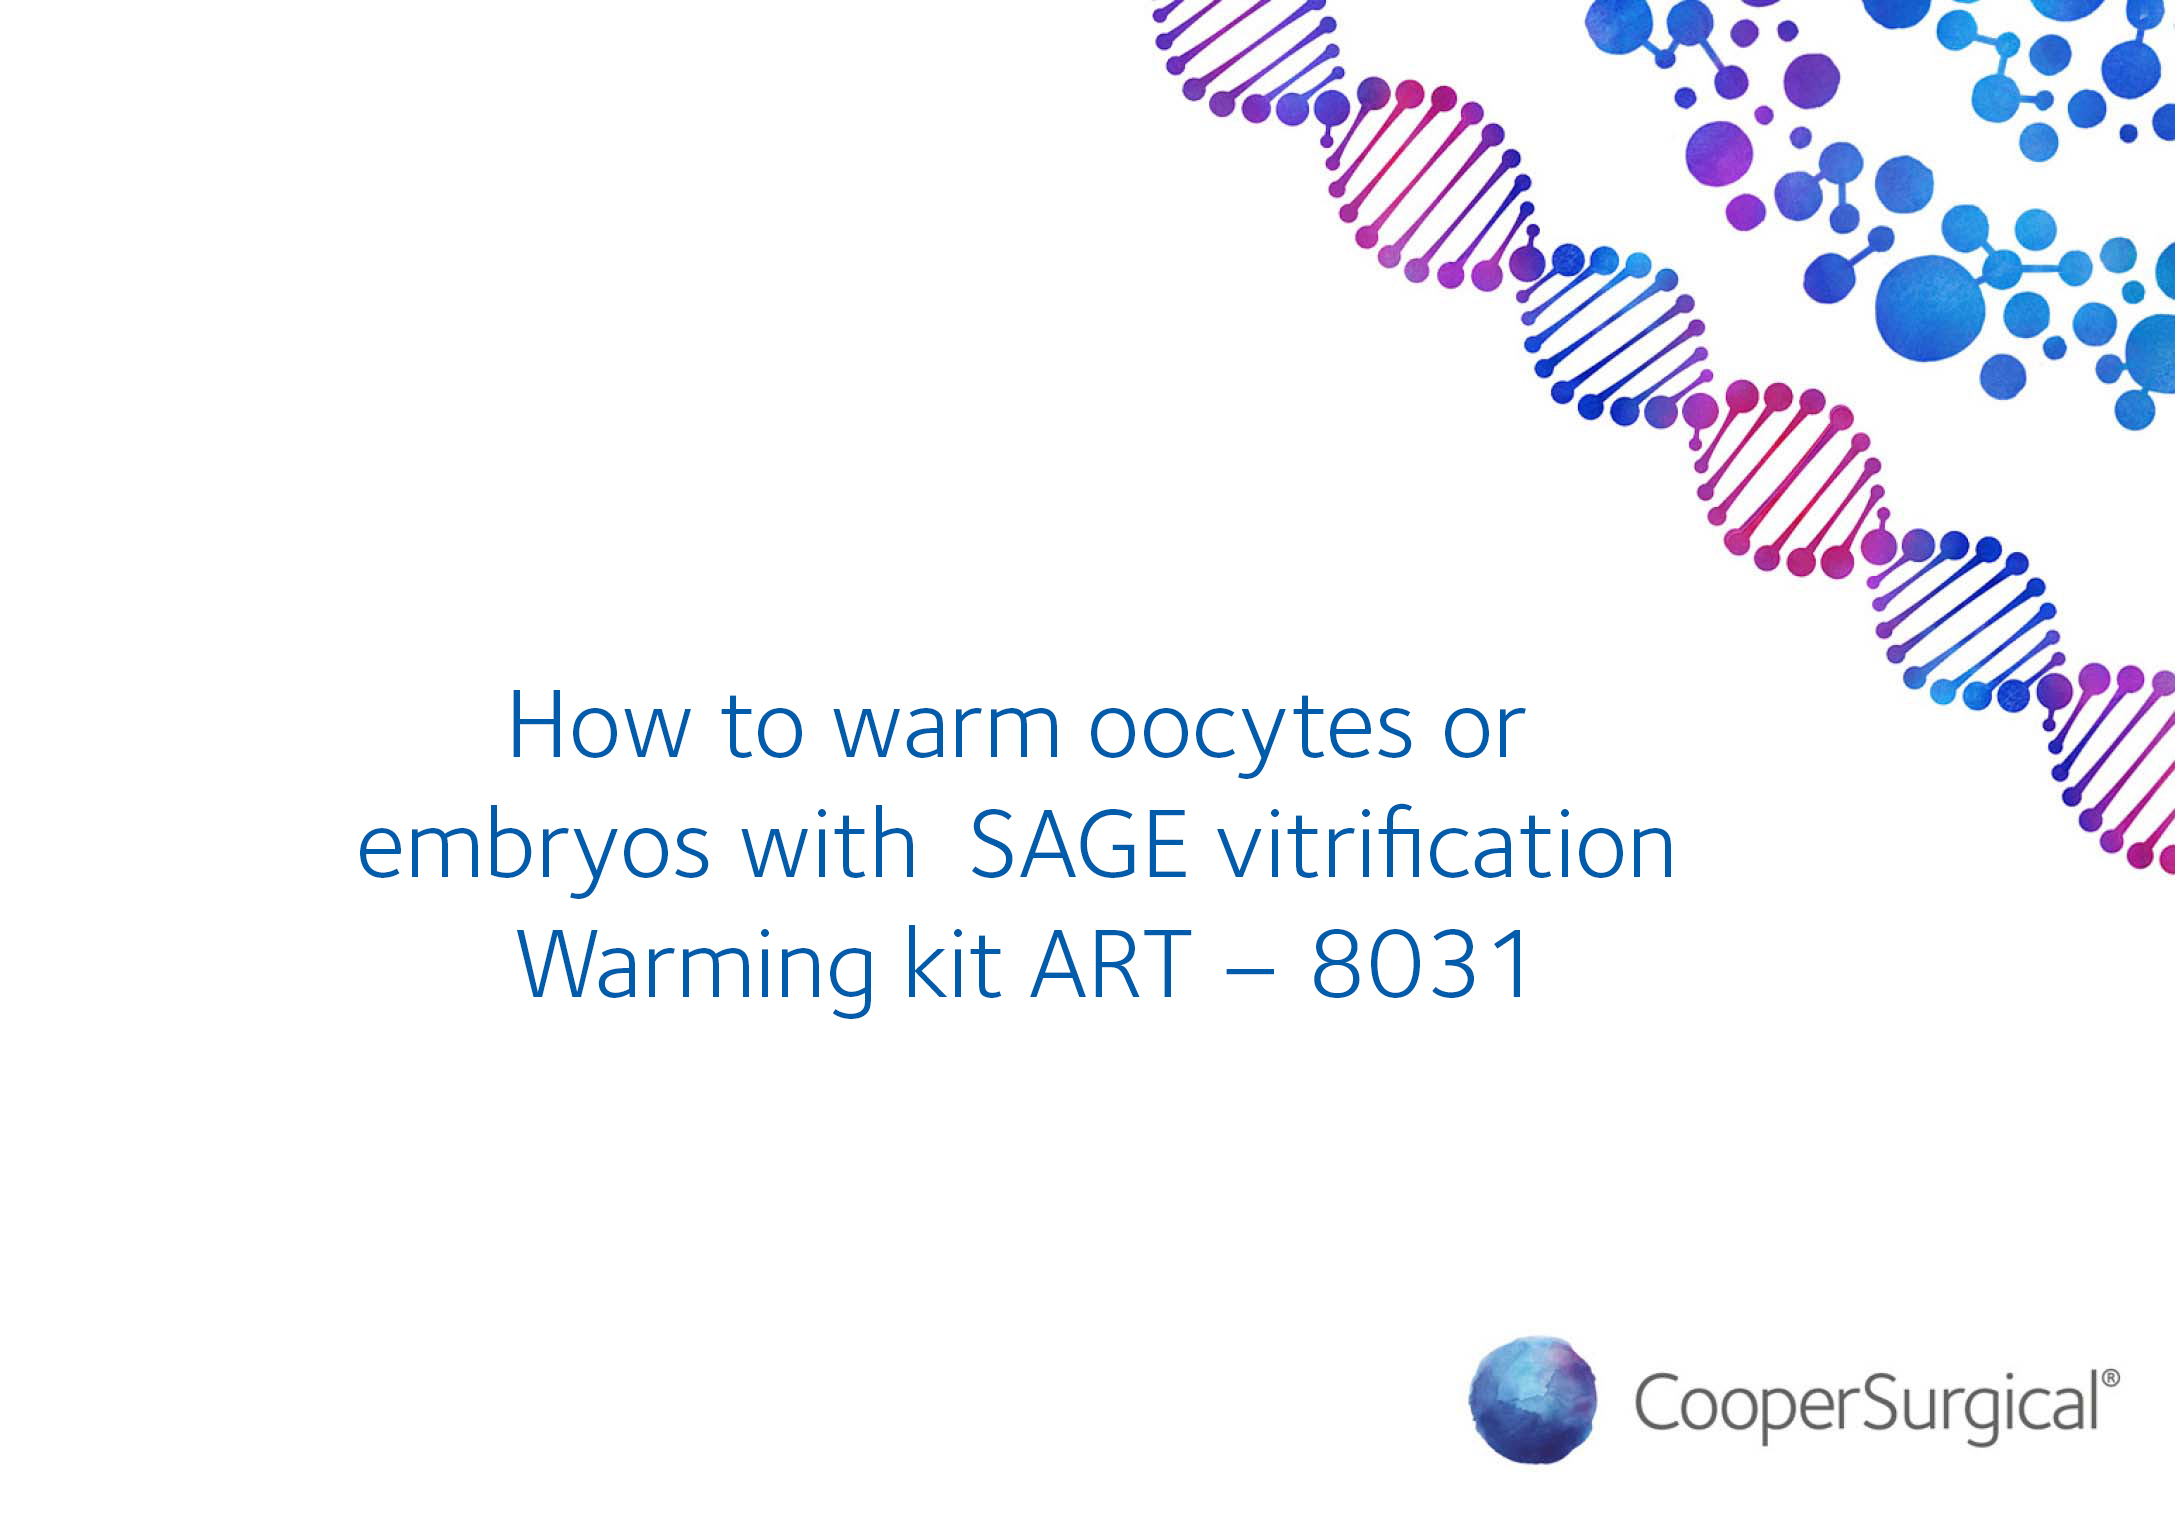 How to warm oocytes or embryos with SAGE vitrification Warming kit ART – 8031